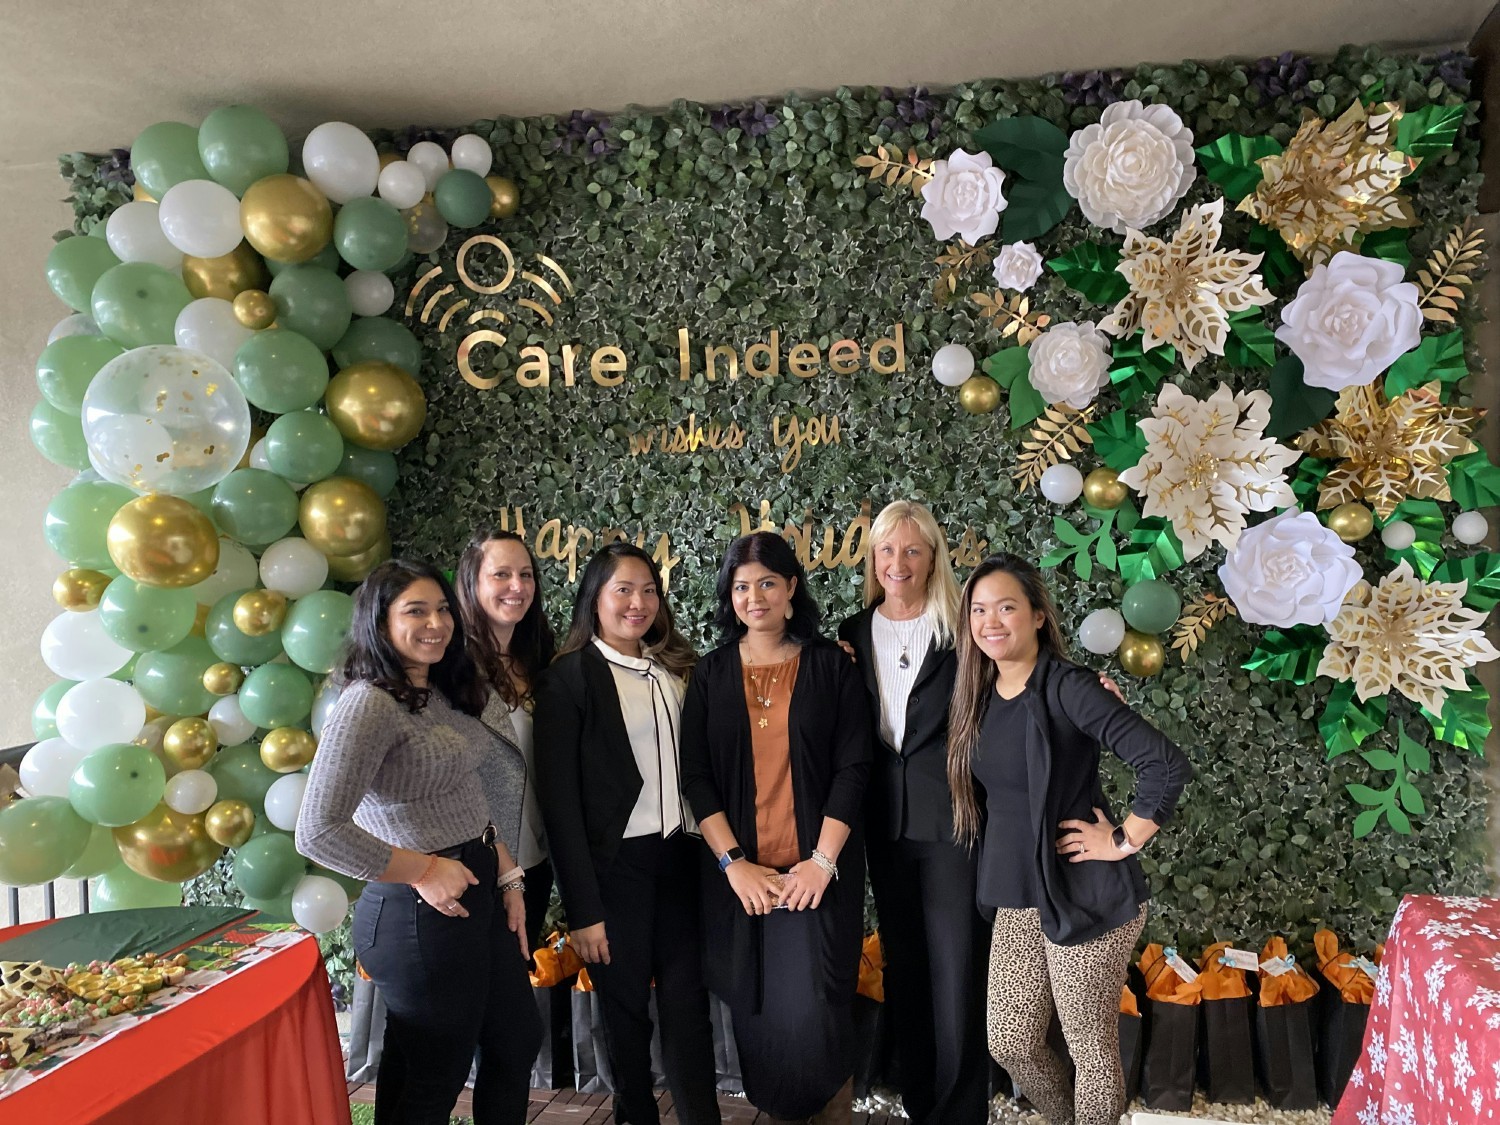 Care Indeed Office Team